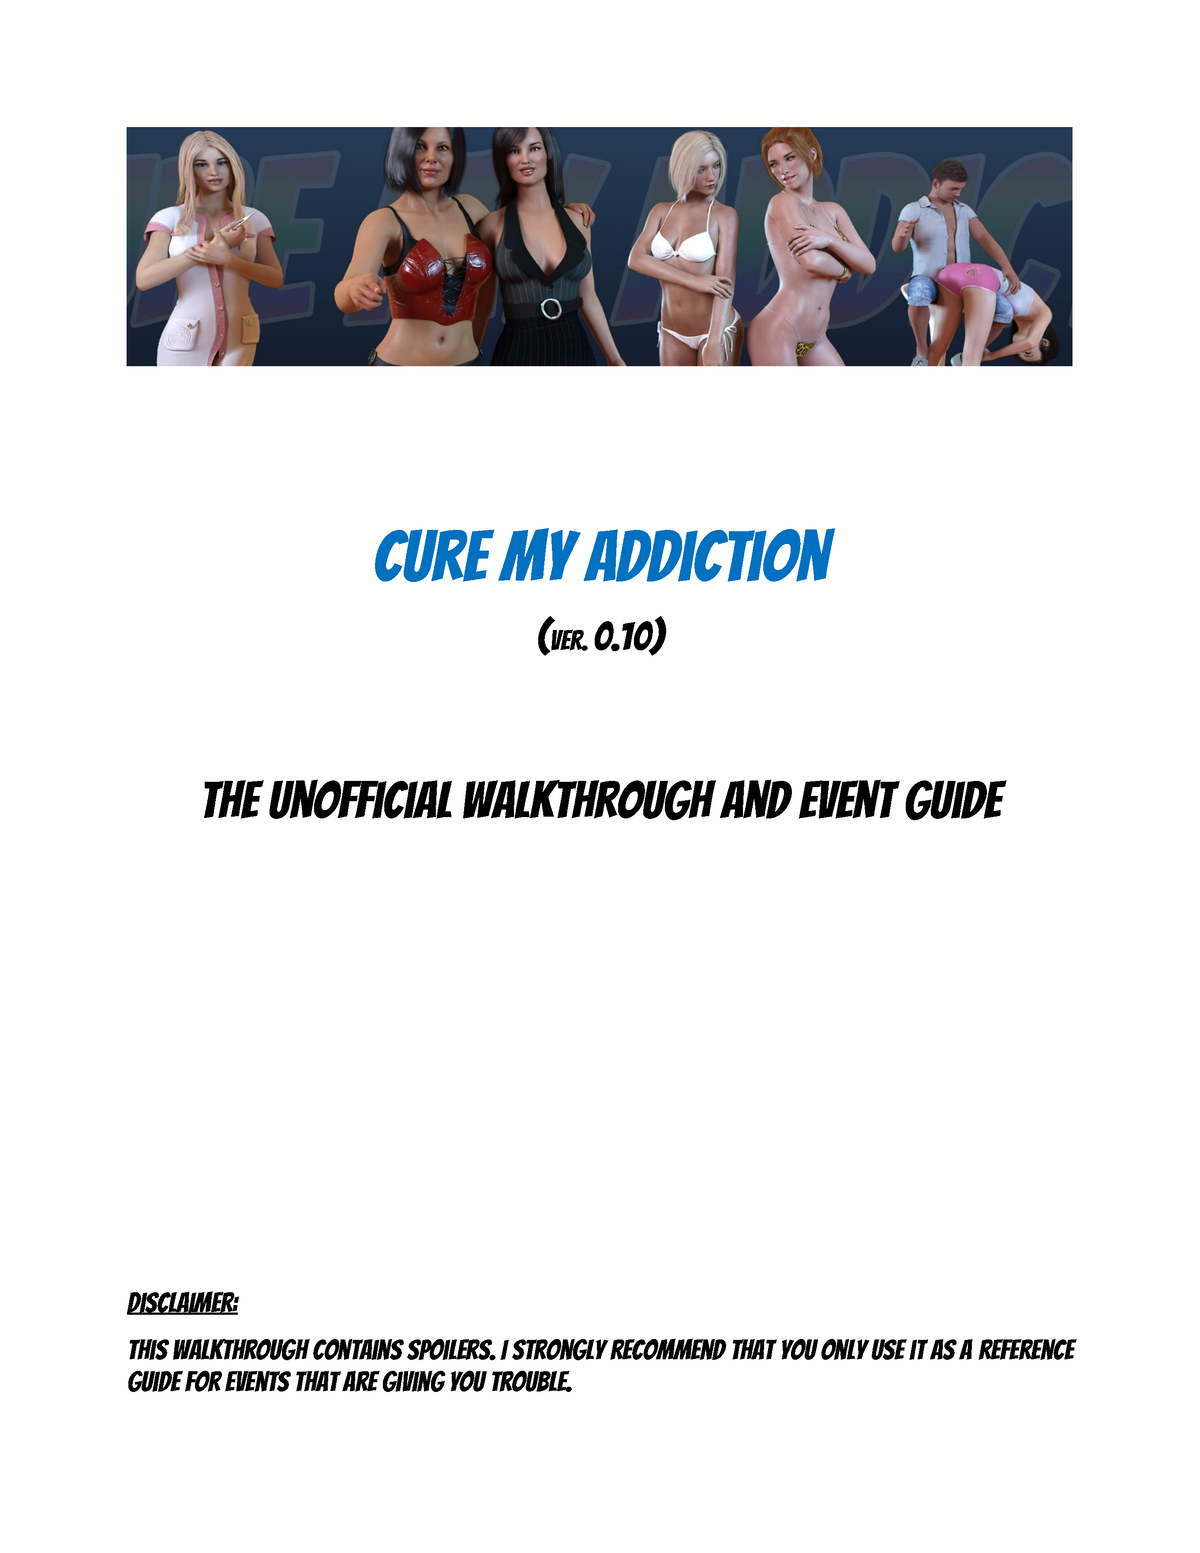 cma-walkthrough-cure-my-addiction-ver-0-the-unofficial-walkthrough-and-event-guide